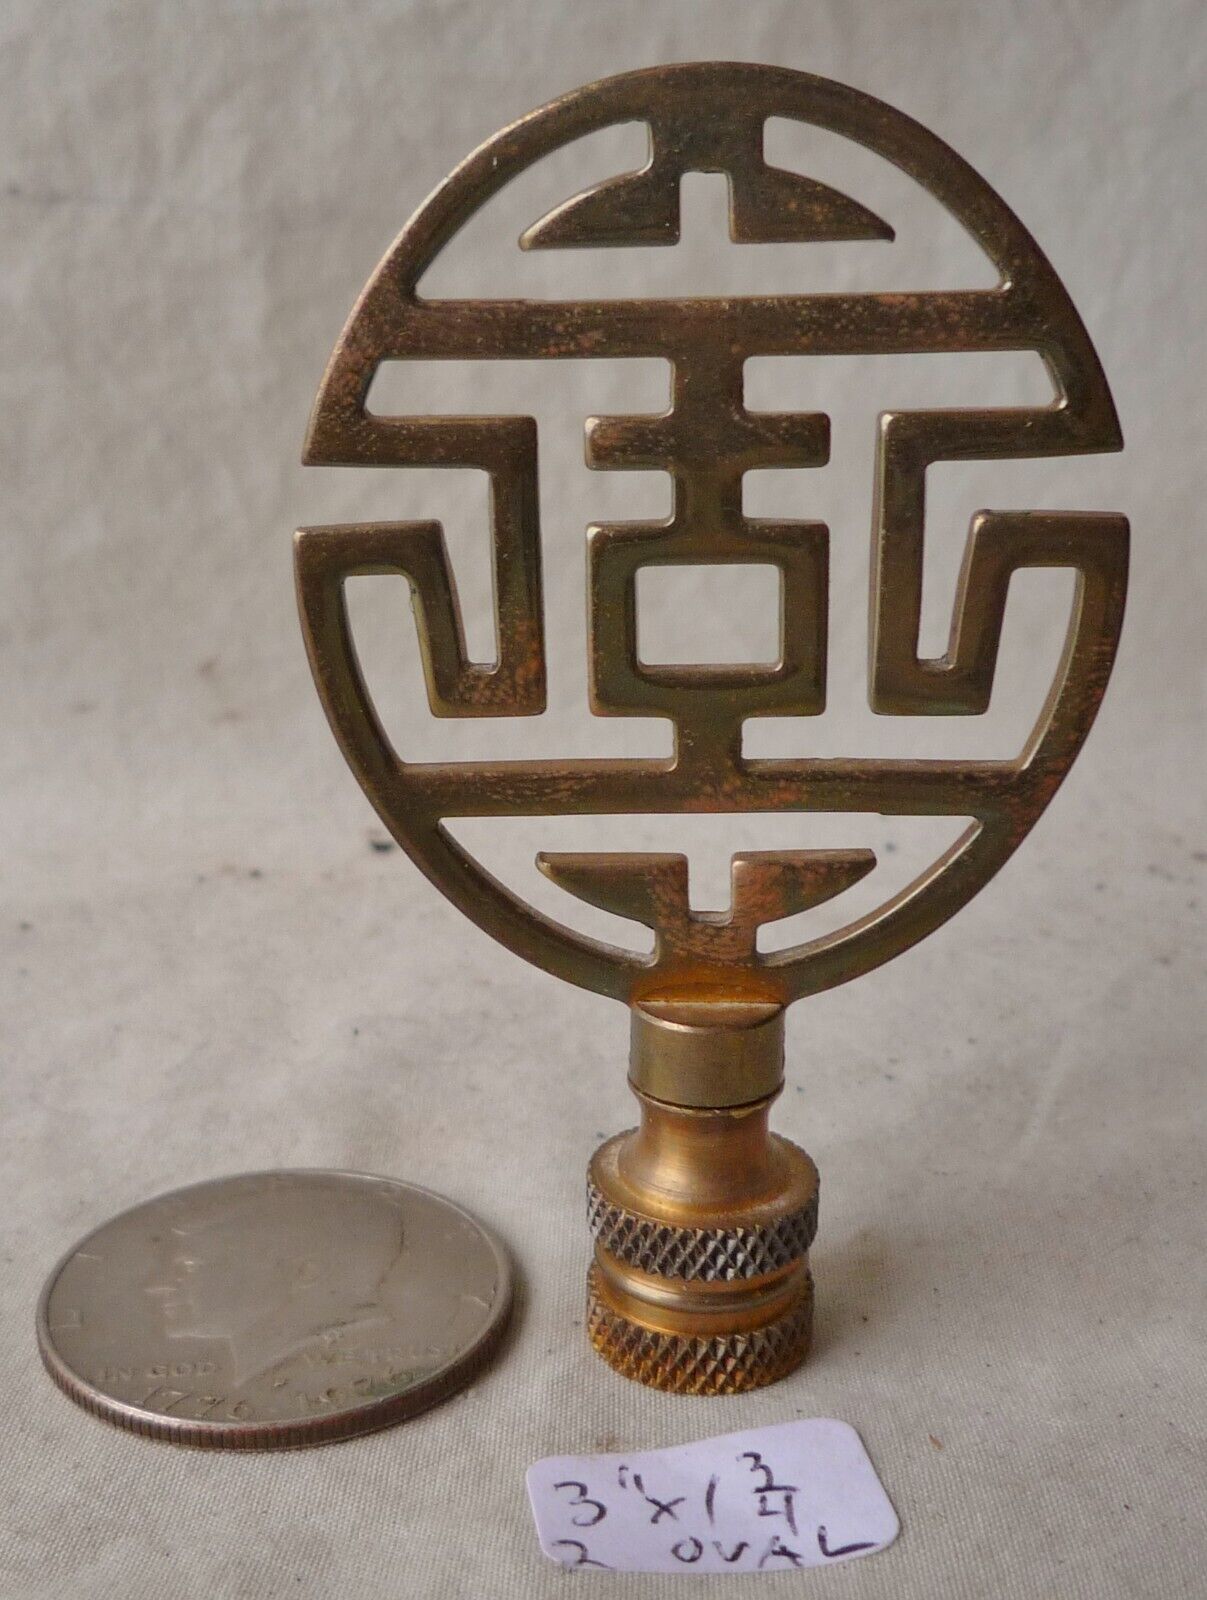 Lamp Finial Asian Oval solid brass old patina 3